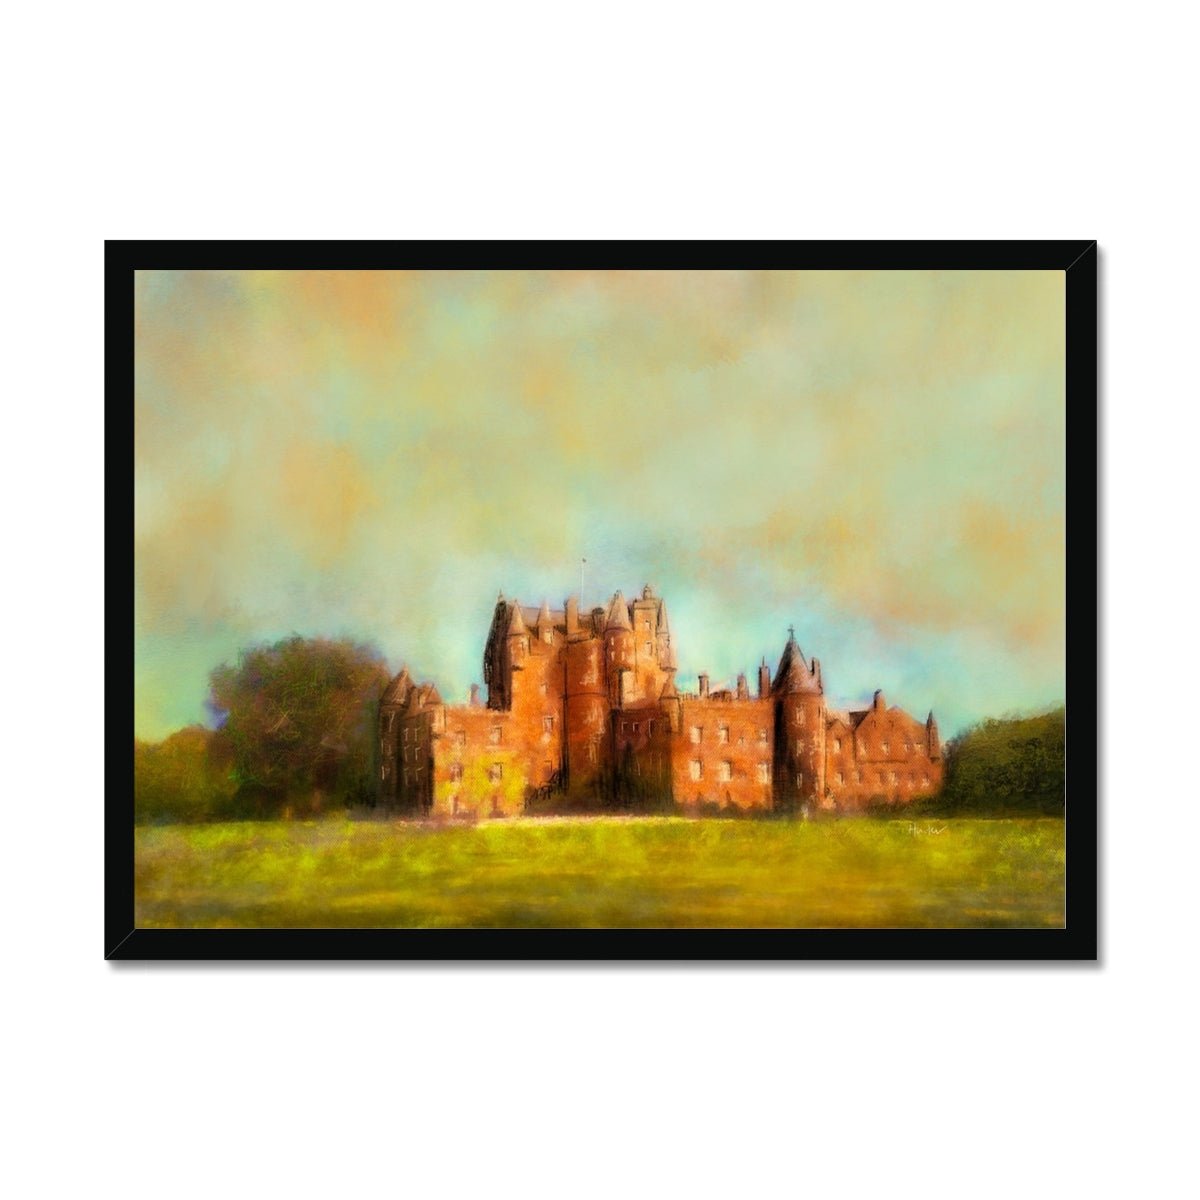 Glamis Castle Painting | Framed Prints From Scotland-Framed Prints-Historic & Iconic Scotland Art Gallery-A2 Landscape-Black Frame-Paintings, Prints, Homeware, Art Gifts From Scotland By Scottish Artist Kevin Hunter